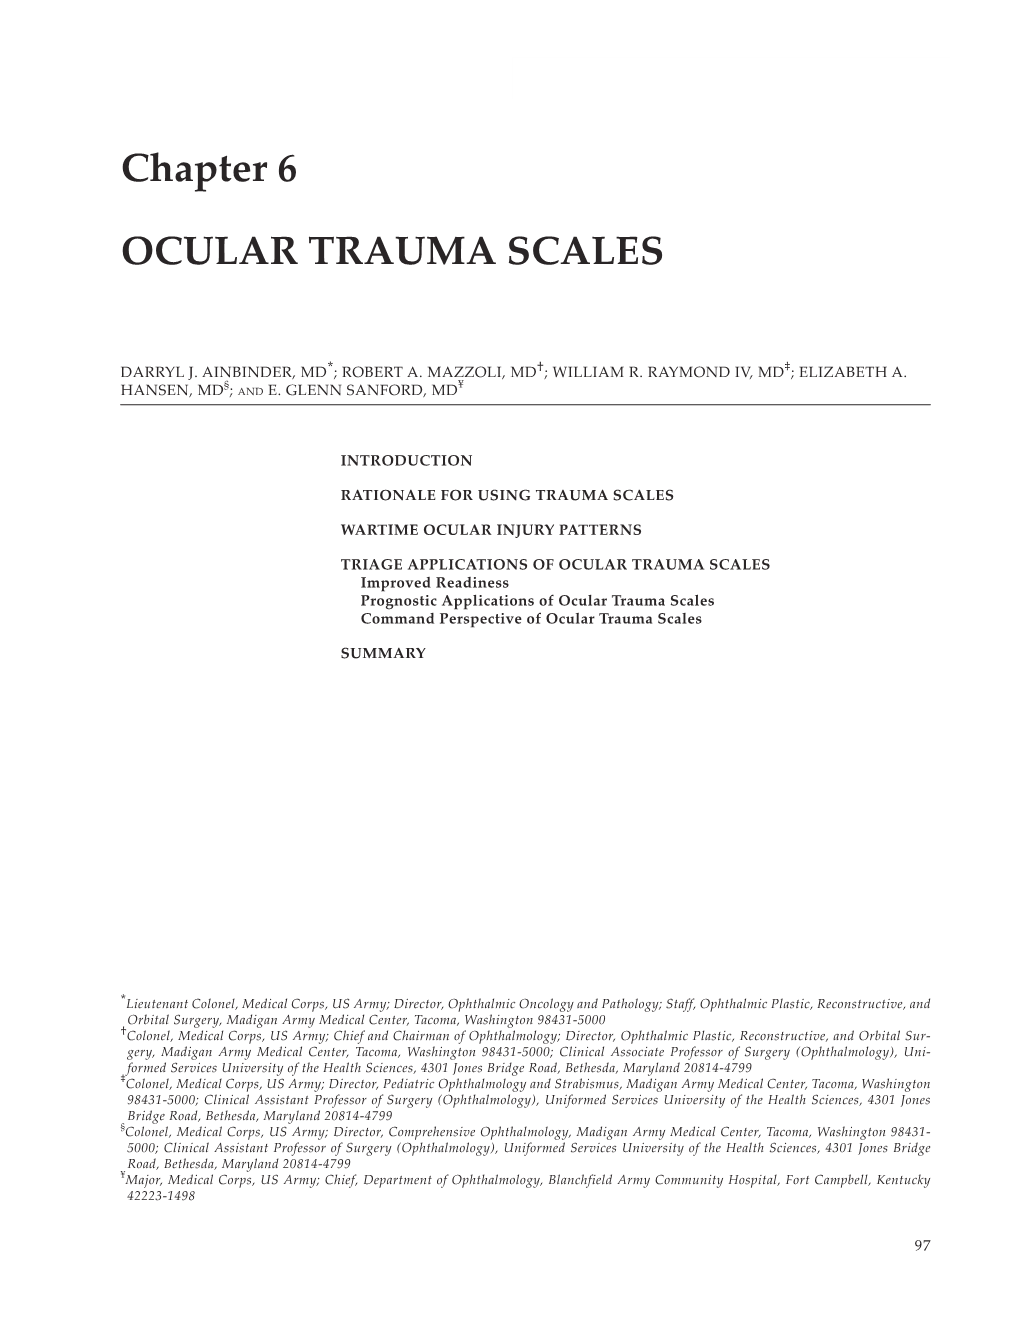 Ophthalmic Care of the Combat Casualty Chapter 6 Ocular Trauma